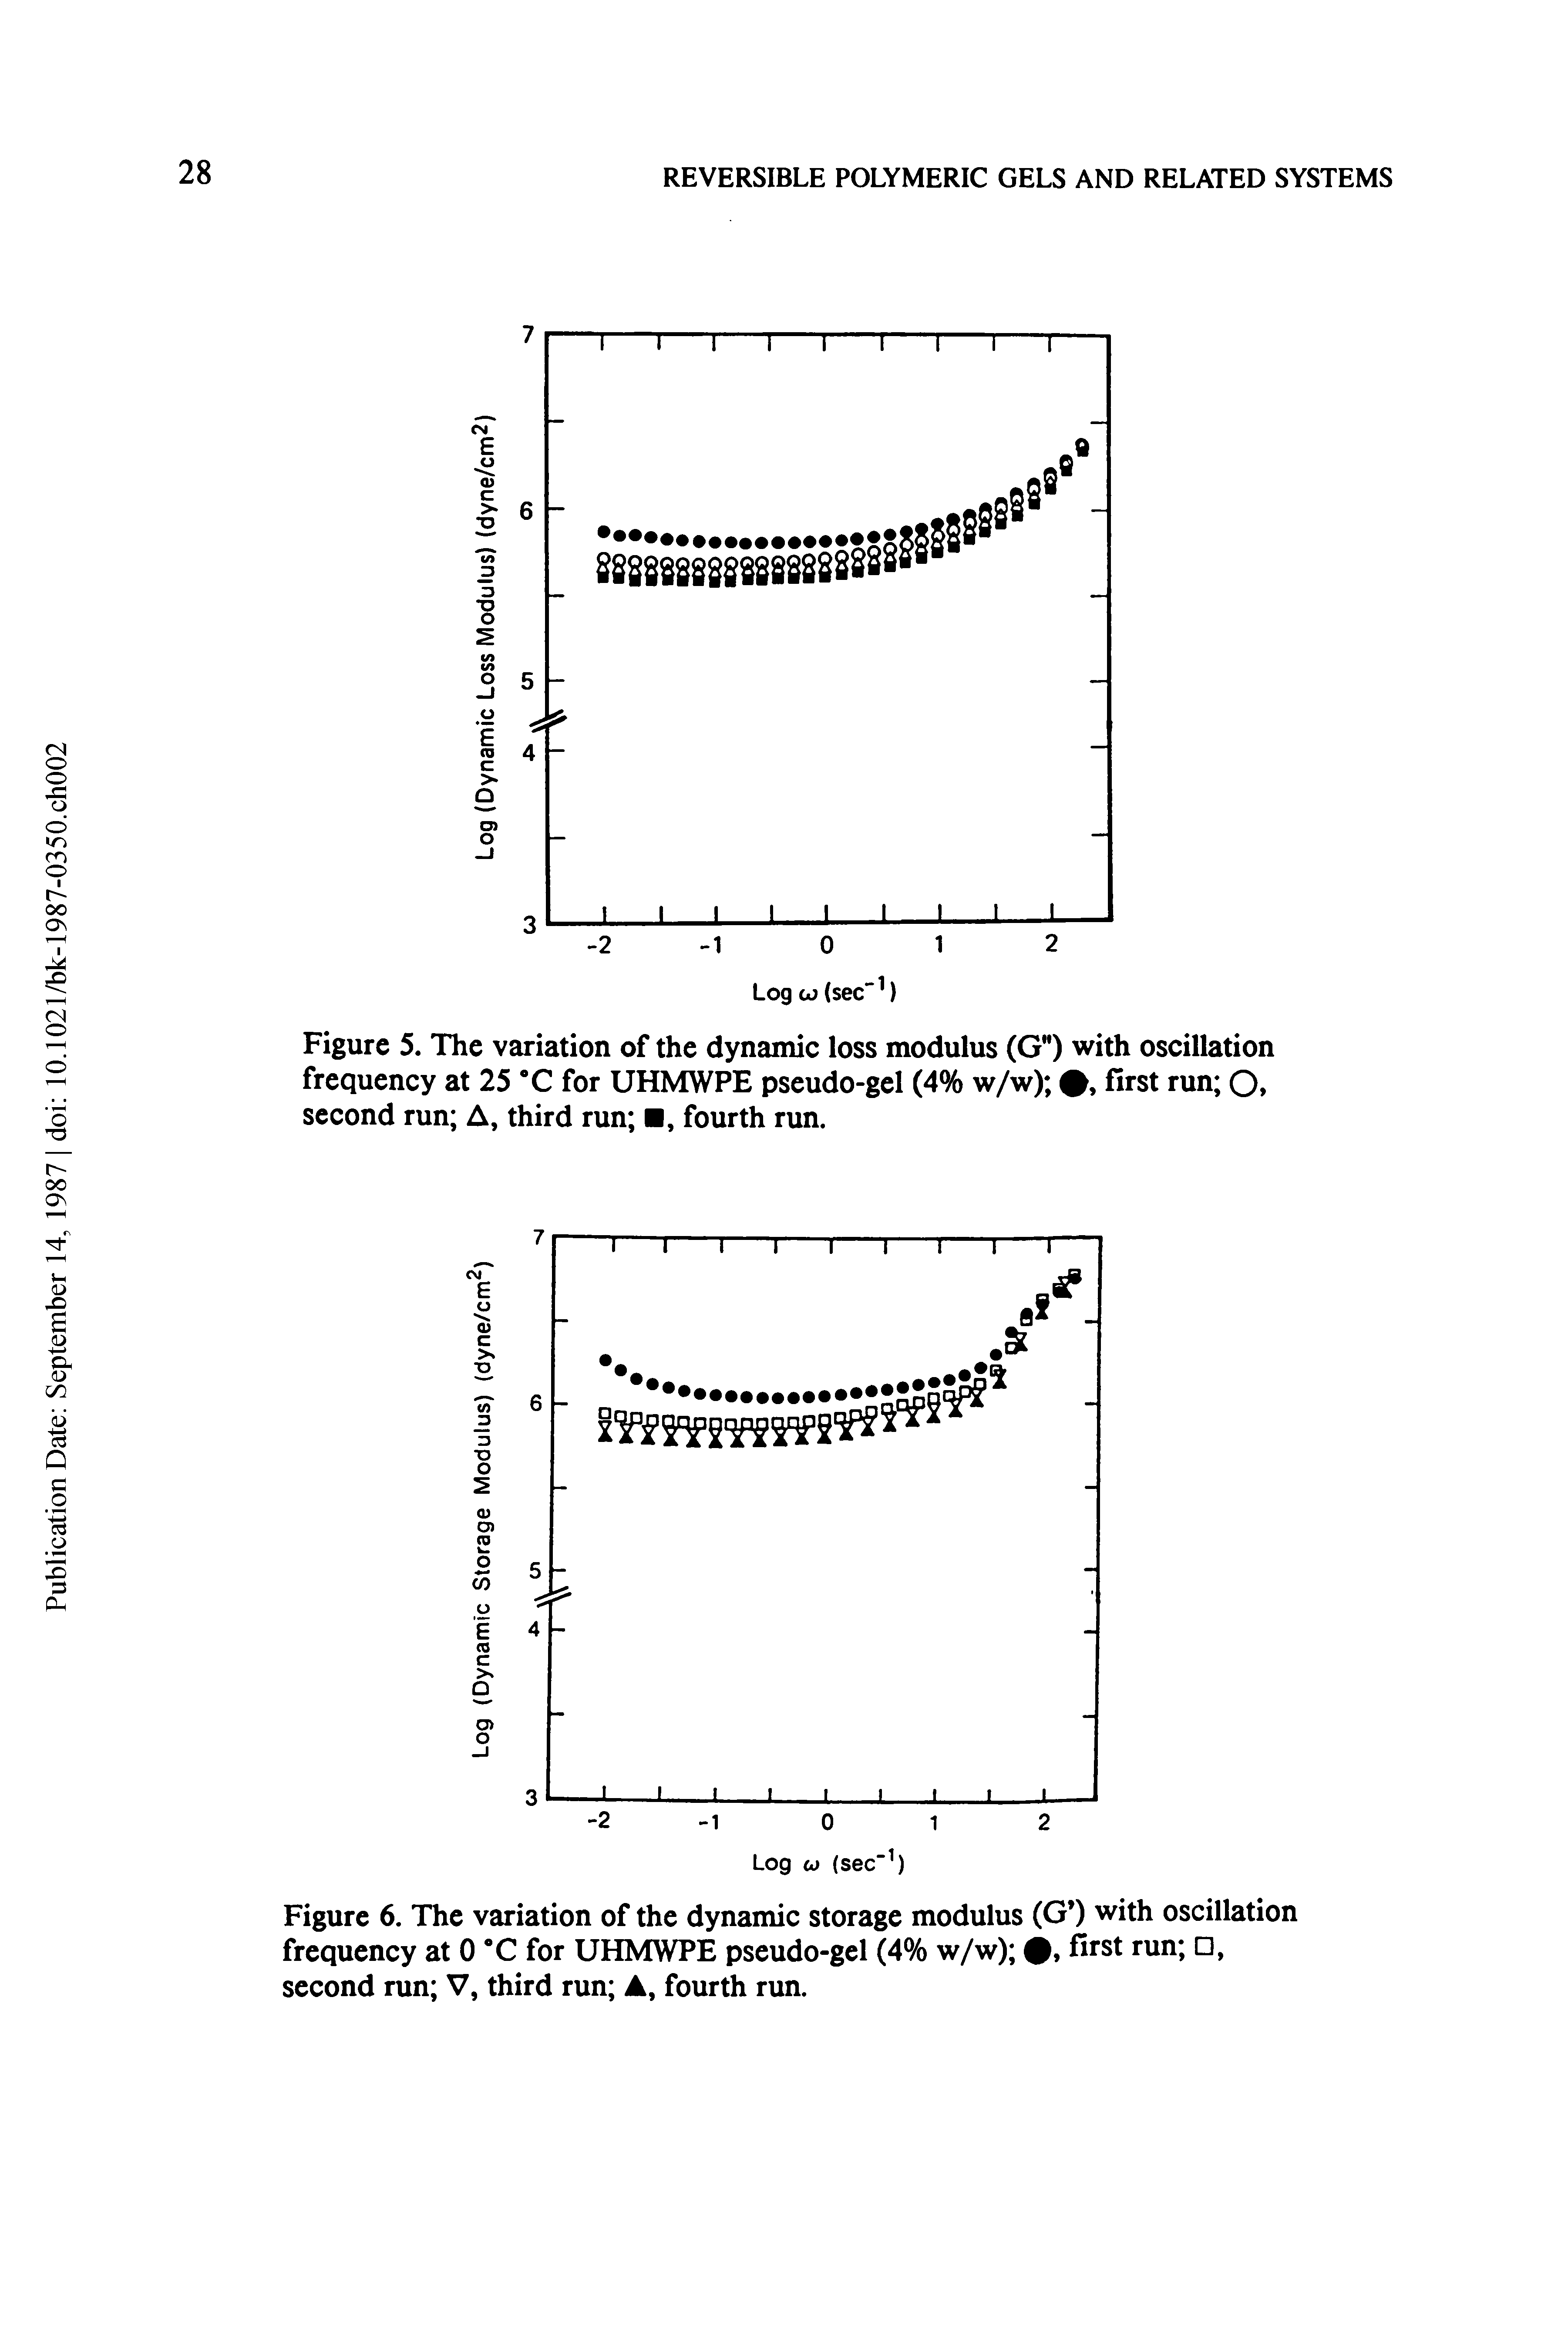 Figure 6. The variation of the dynamic storage modulus (G ) with oscillation frequency at 0 C for UHMWPE pseudo-gel (4% w/w) first run , second run V, third run A, fourth run.